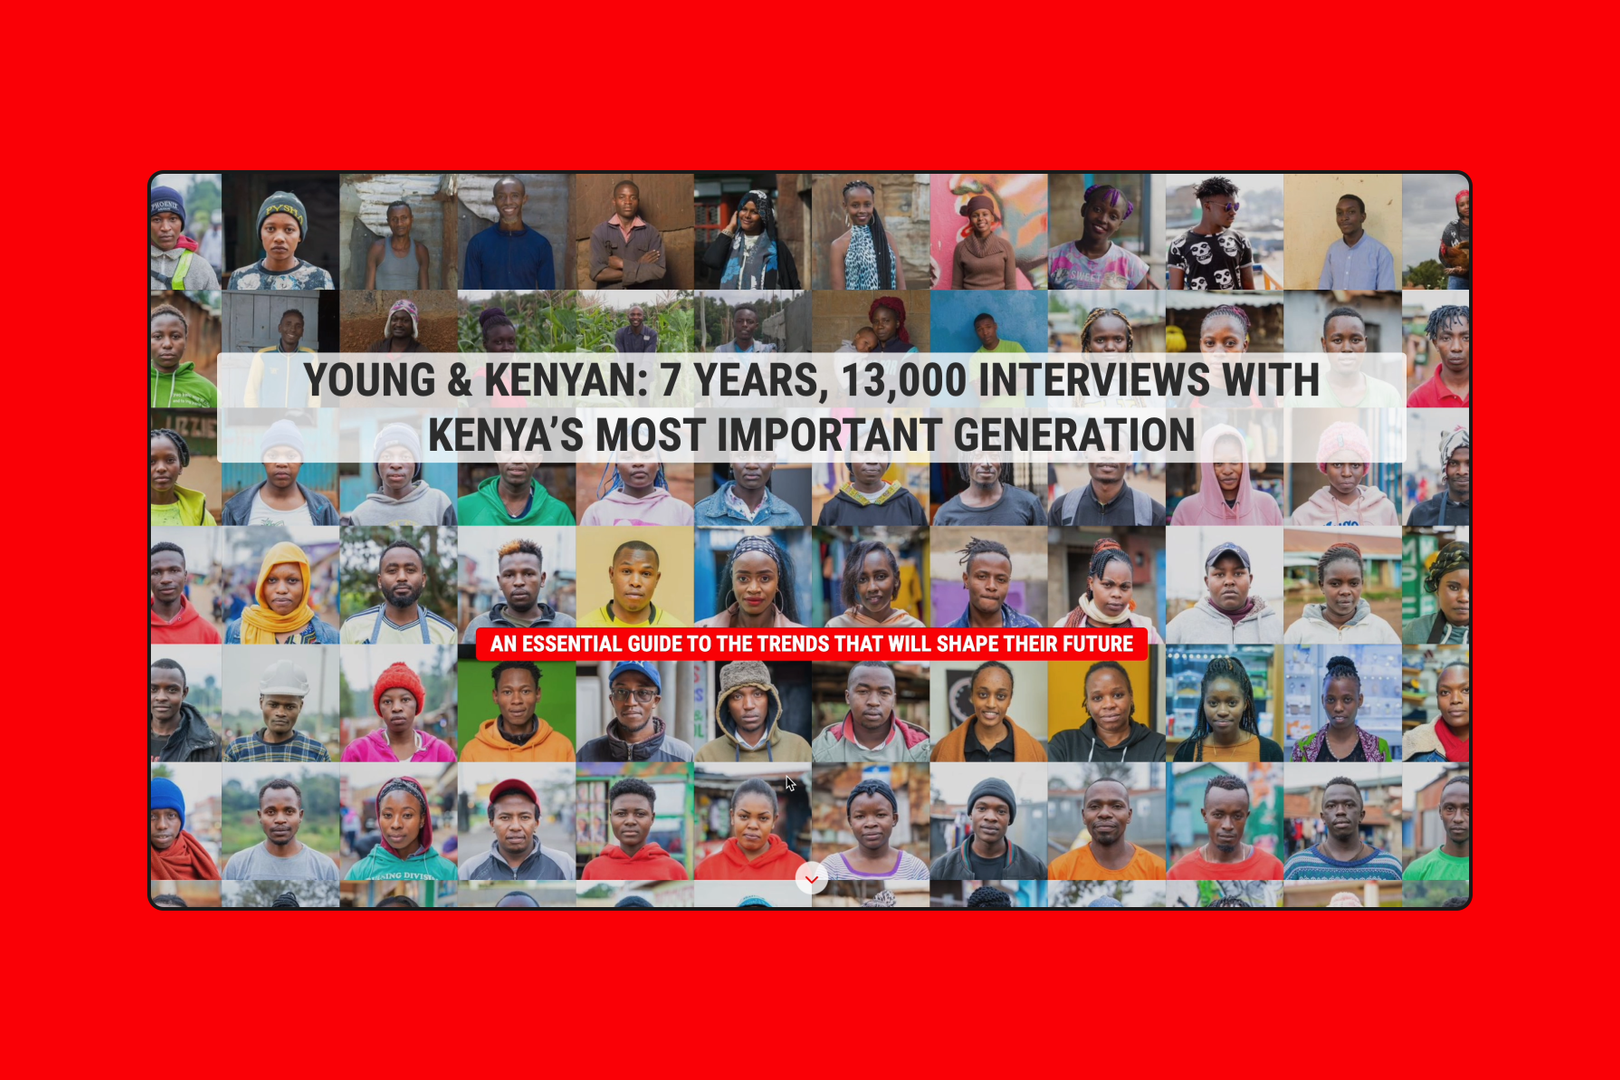 A grid of photos of Kenya's young generation. Over their headshots is the text 'Young & Kenyan: 7 years, 13,000 interviews with Kenya's most important generation.